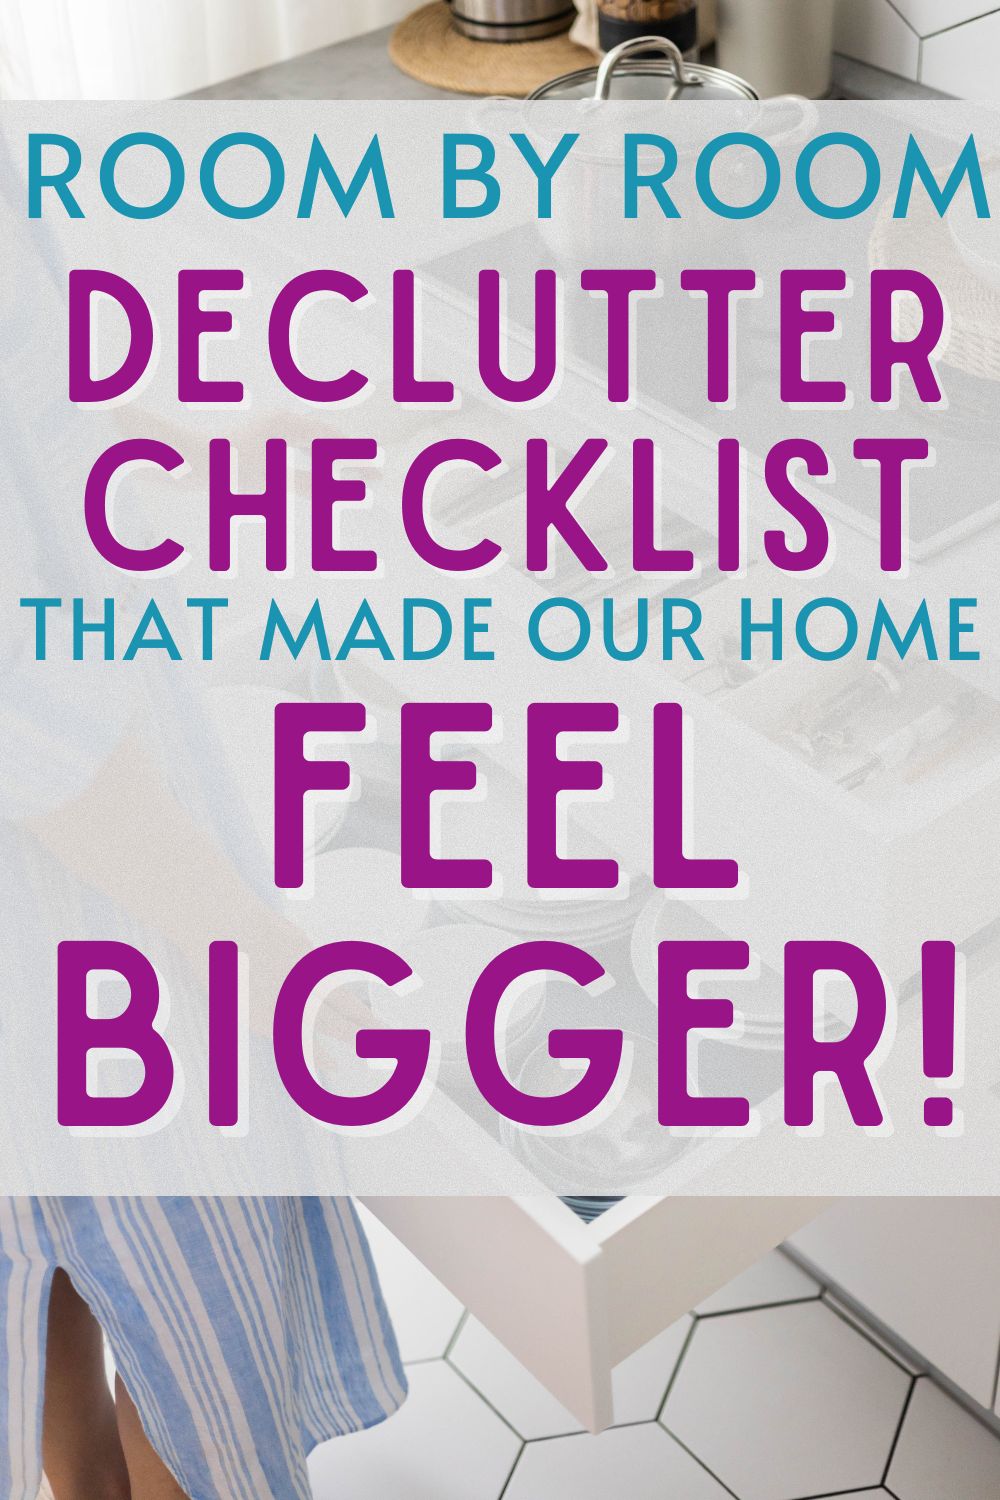 text overlay reads "declutter checklist that made our home feel bigger!"